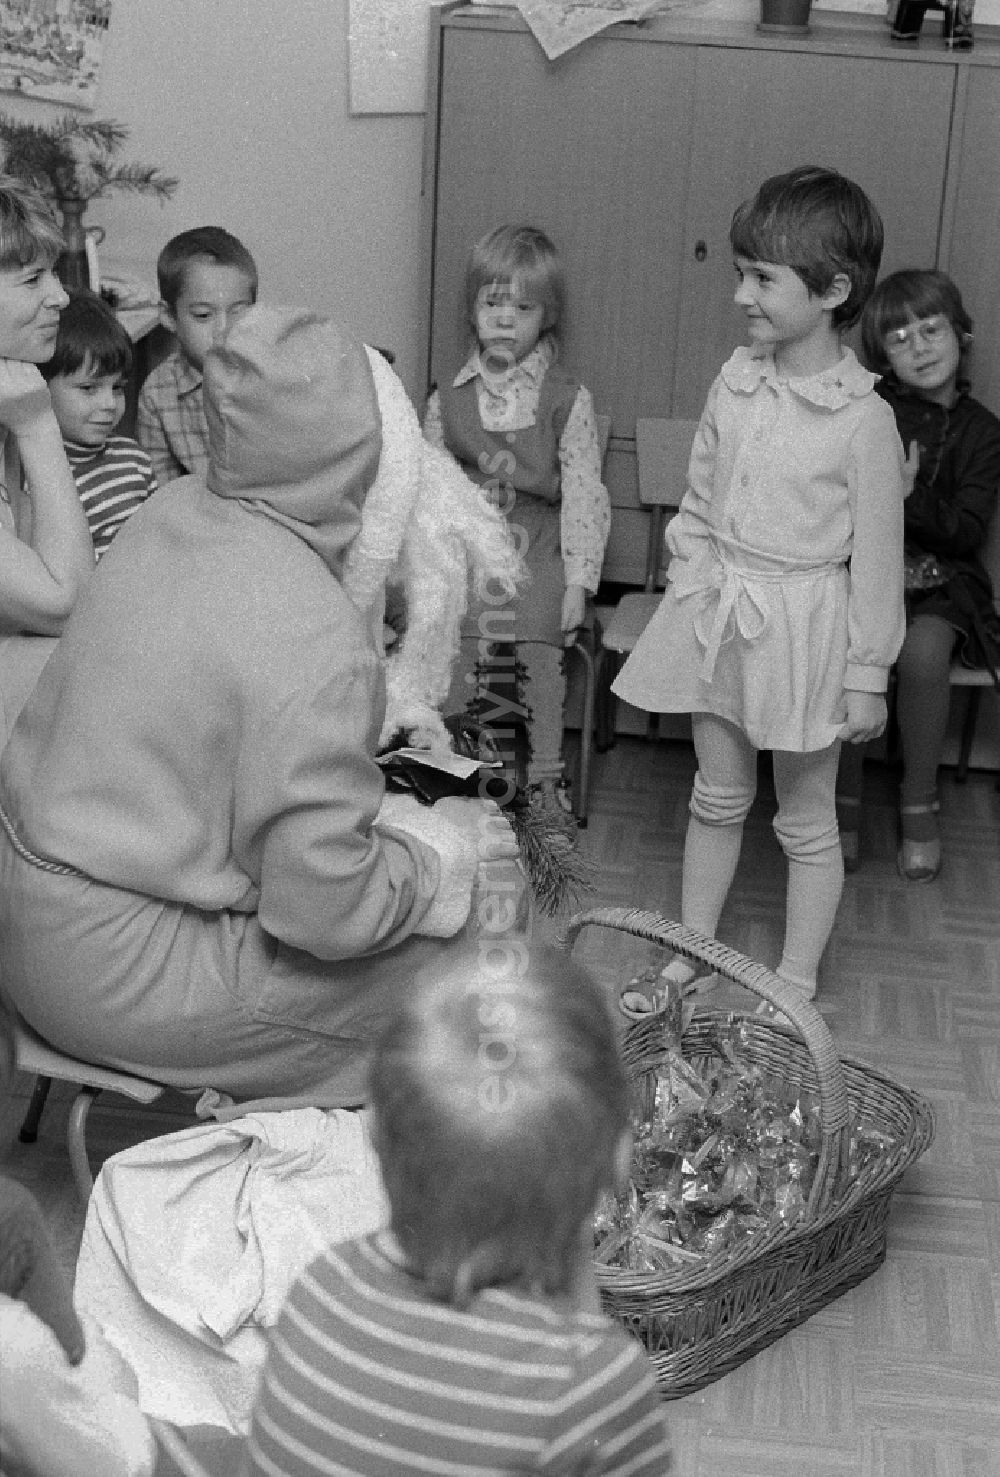 GDR photo archive: Berlin - The Santa Claus gives children with presents in a kindergarten in Berlin, the former capital of the GDR, German democratic republic